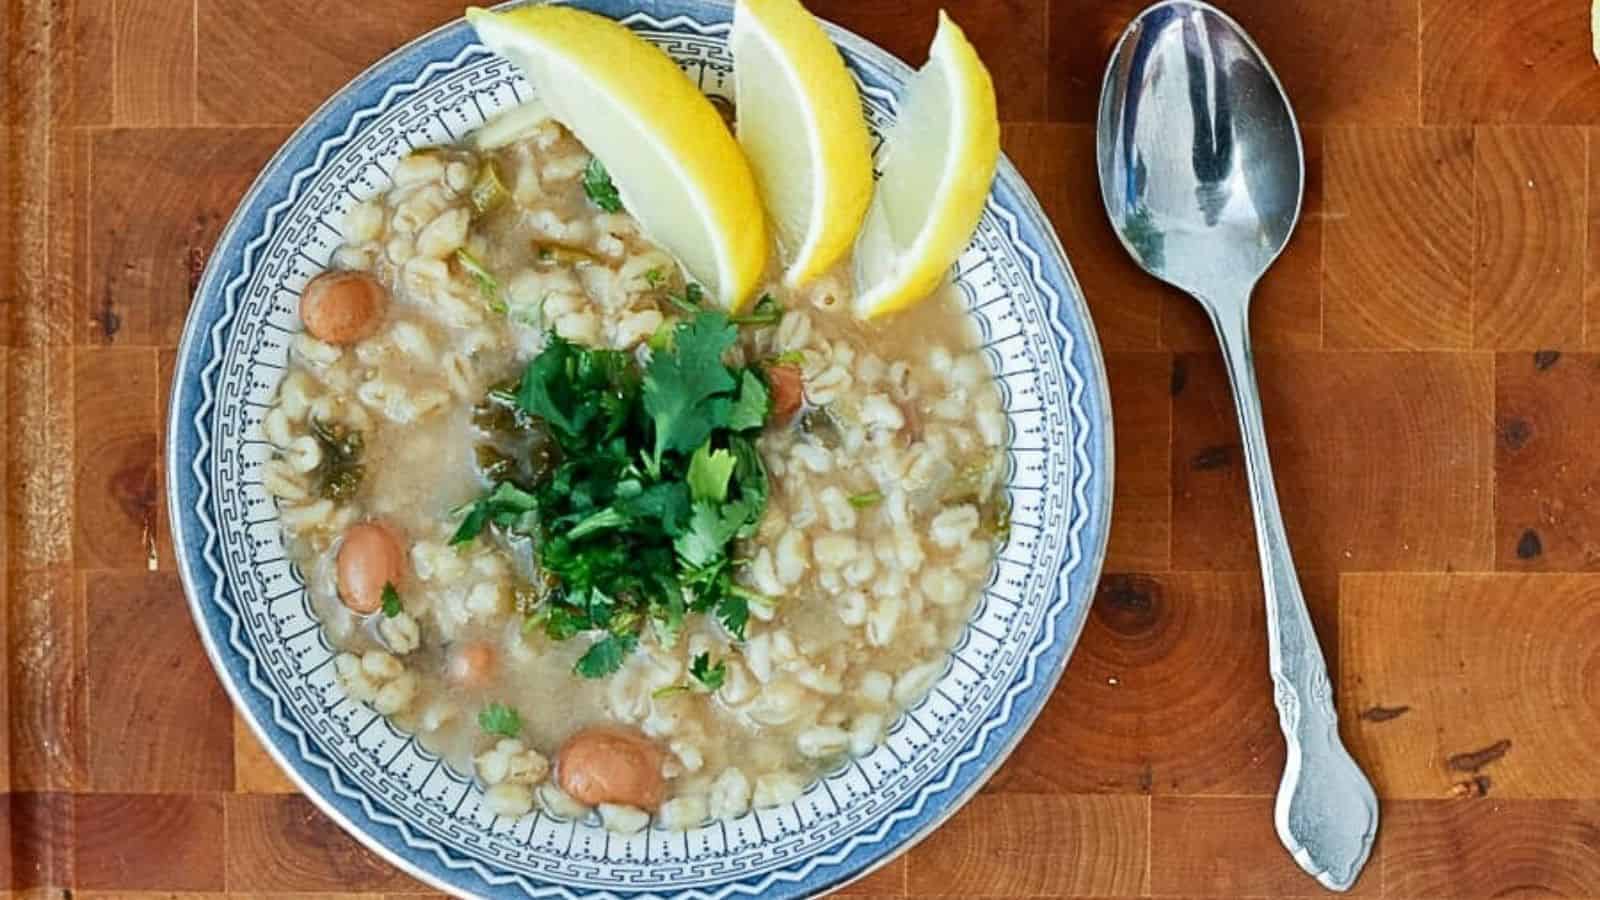 A bowl of barley soup with lemon wedges on a wooden table.